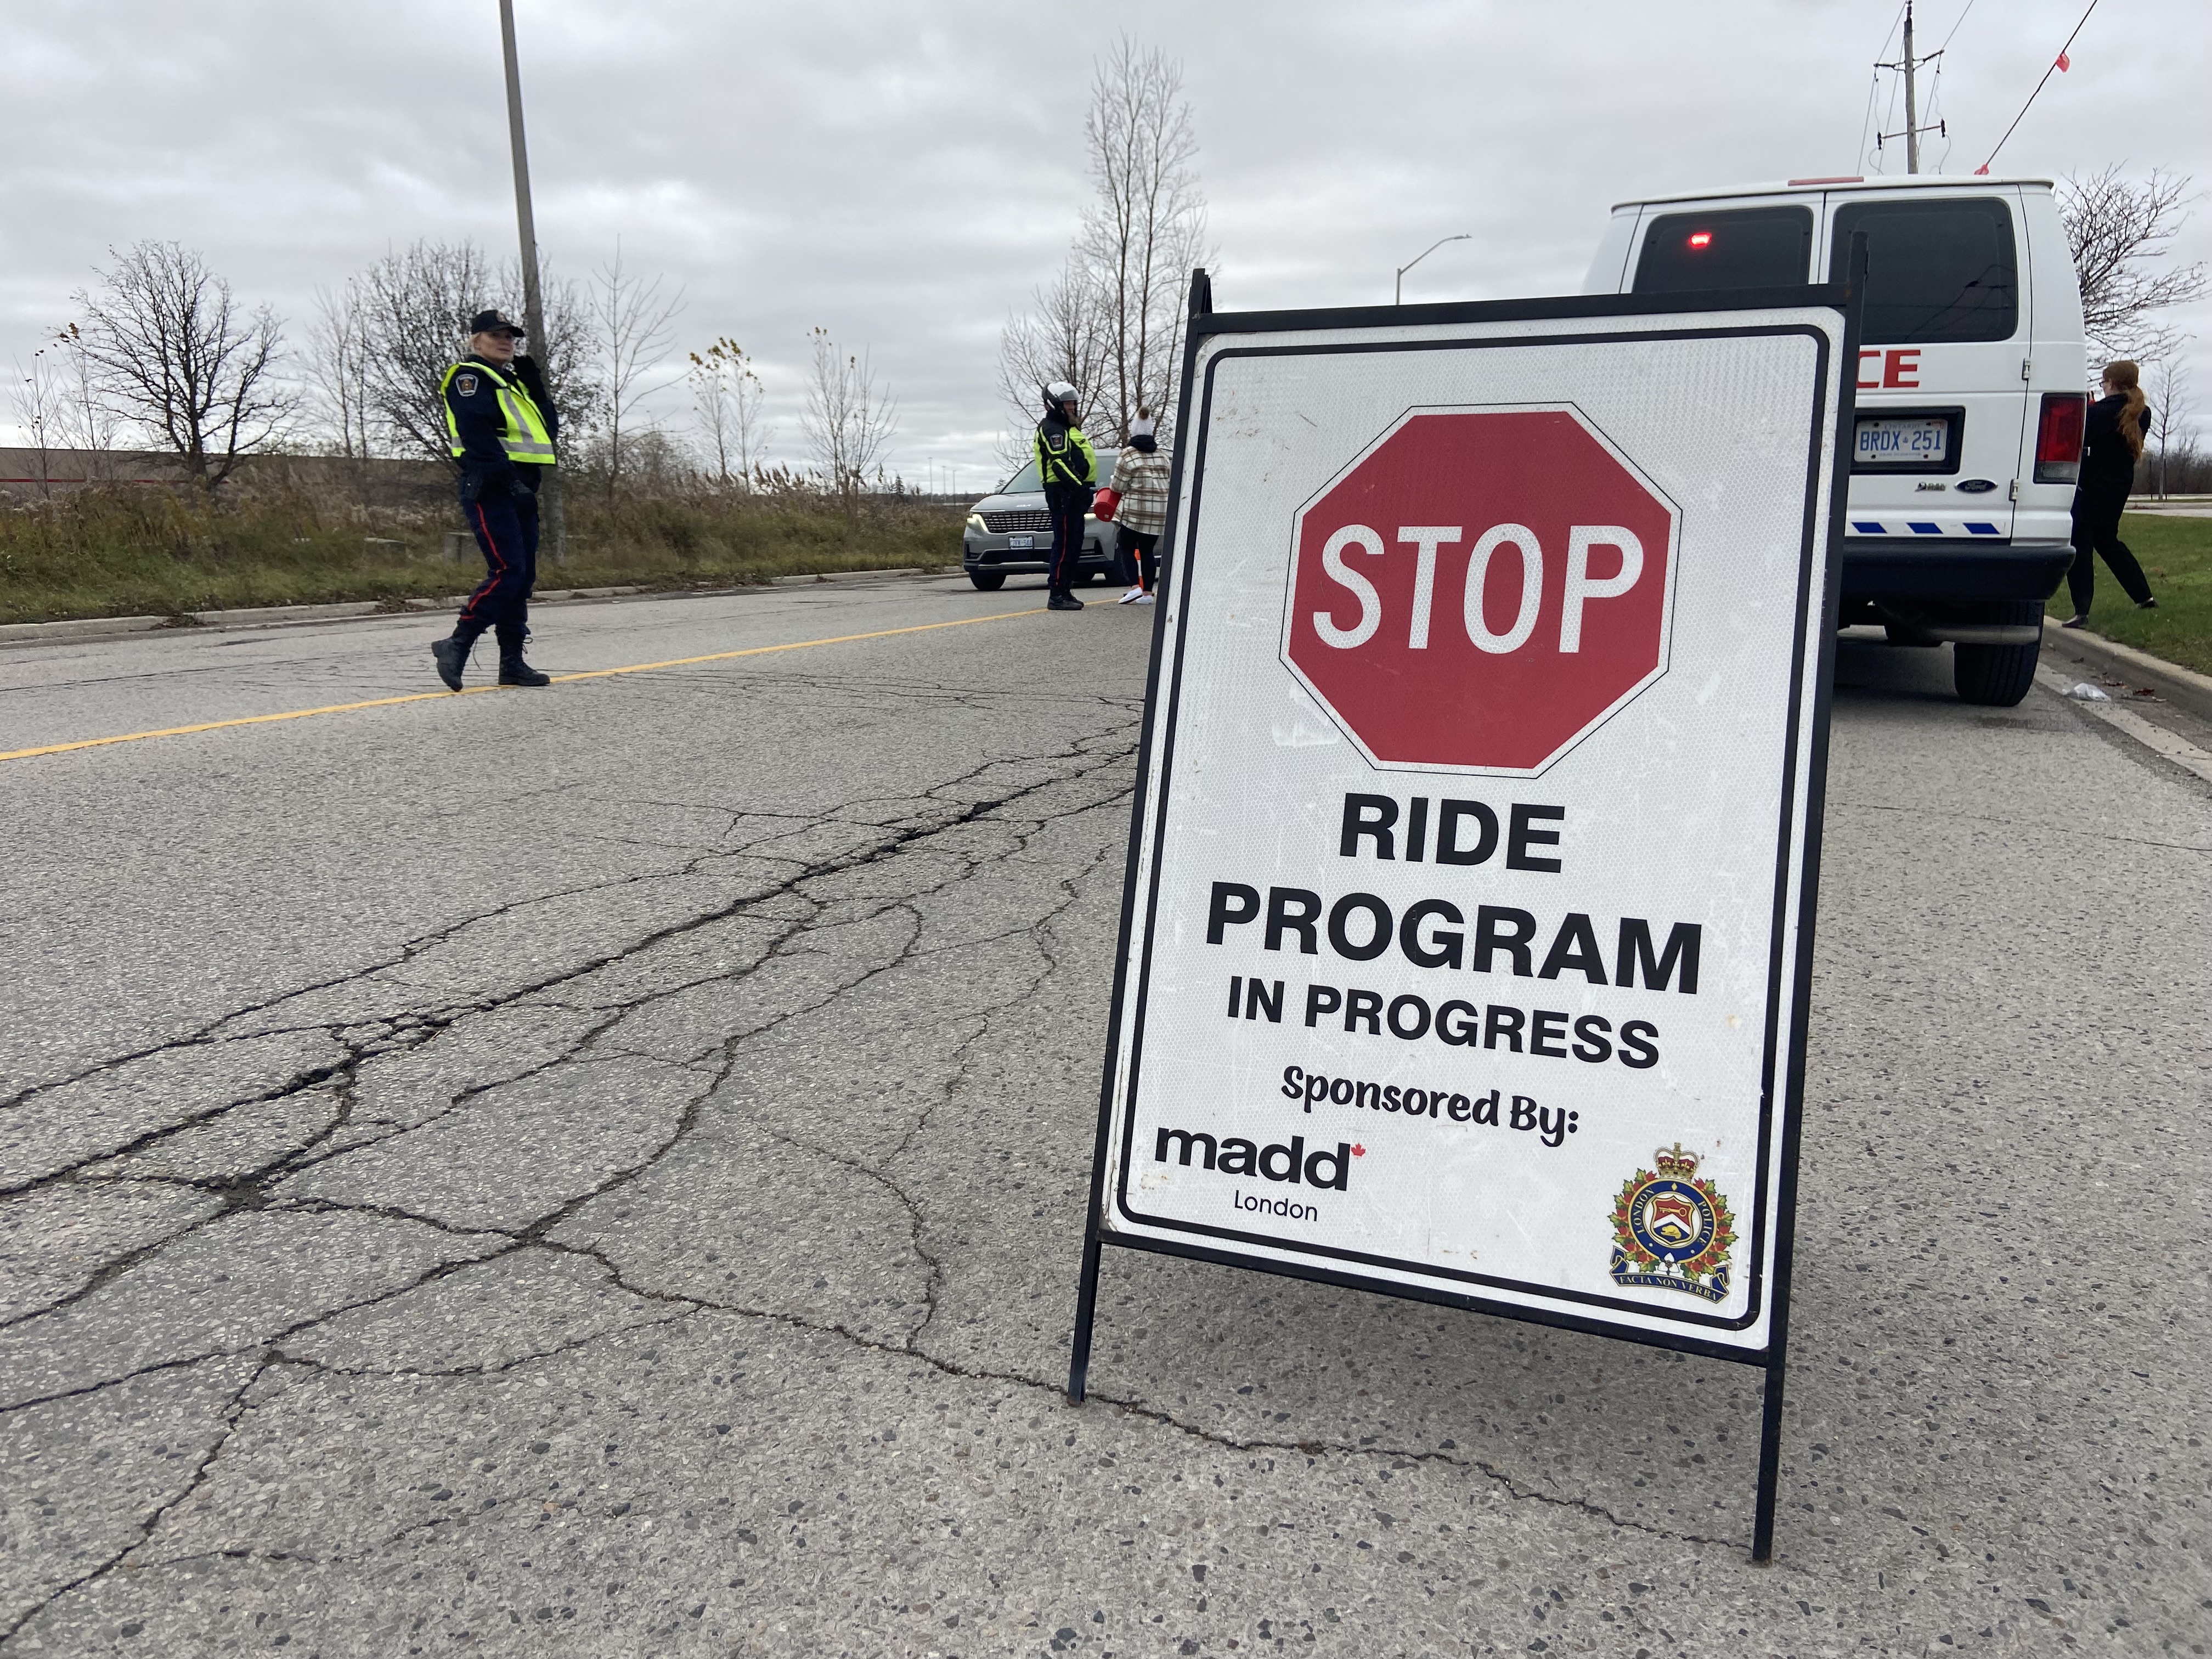 OPP Festive RIDE campaign against impaired driving gets underway ahead of holiday season